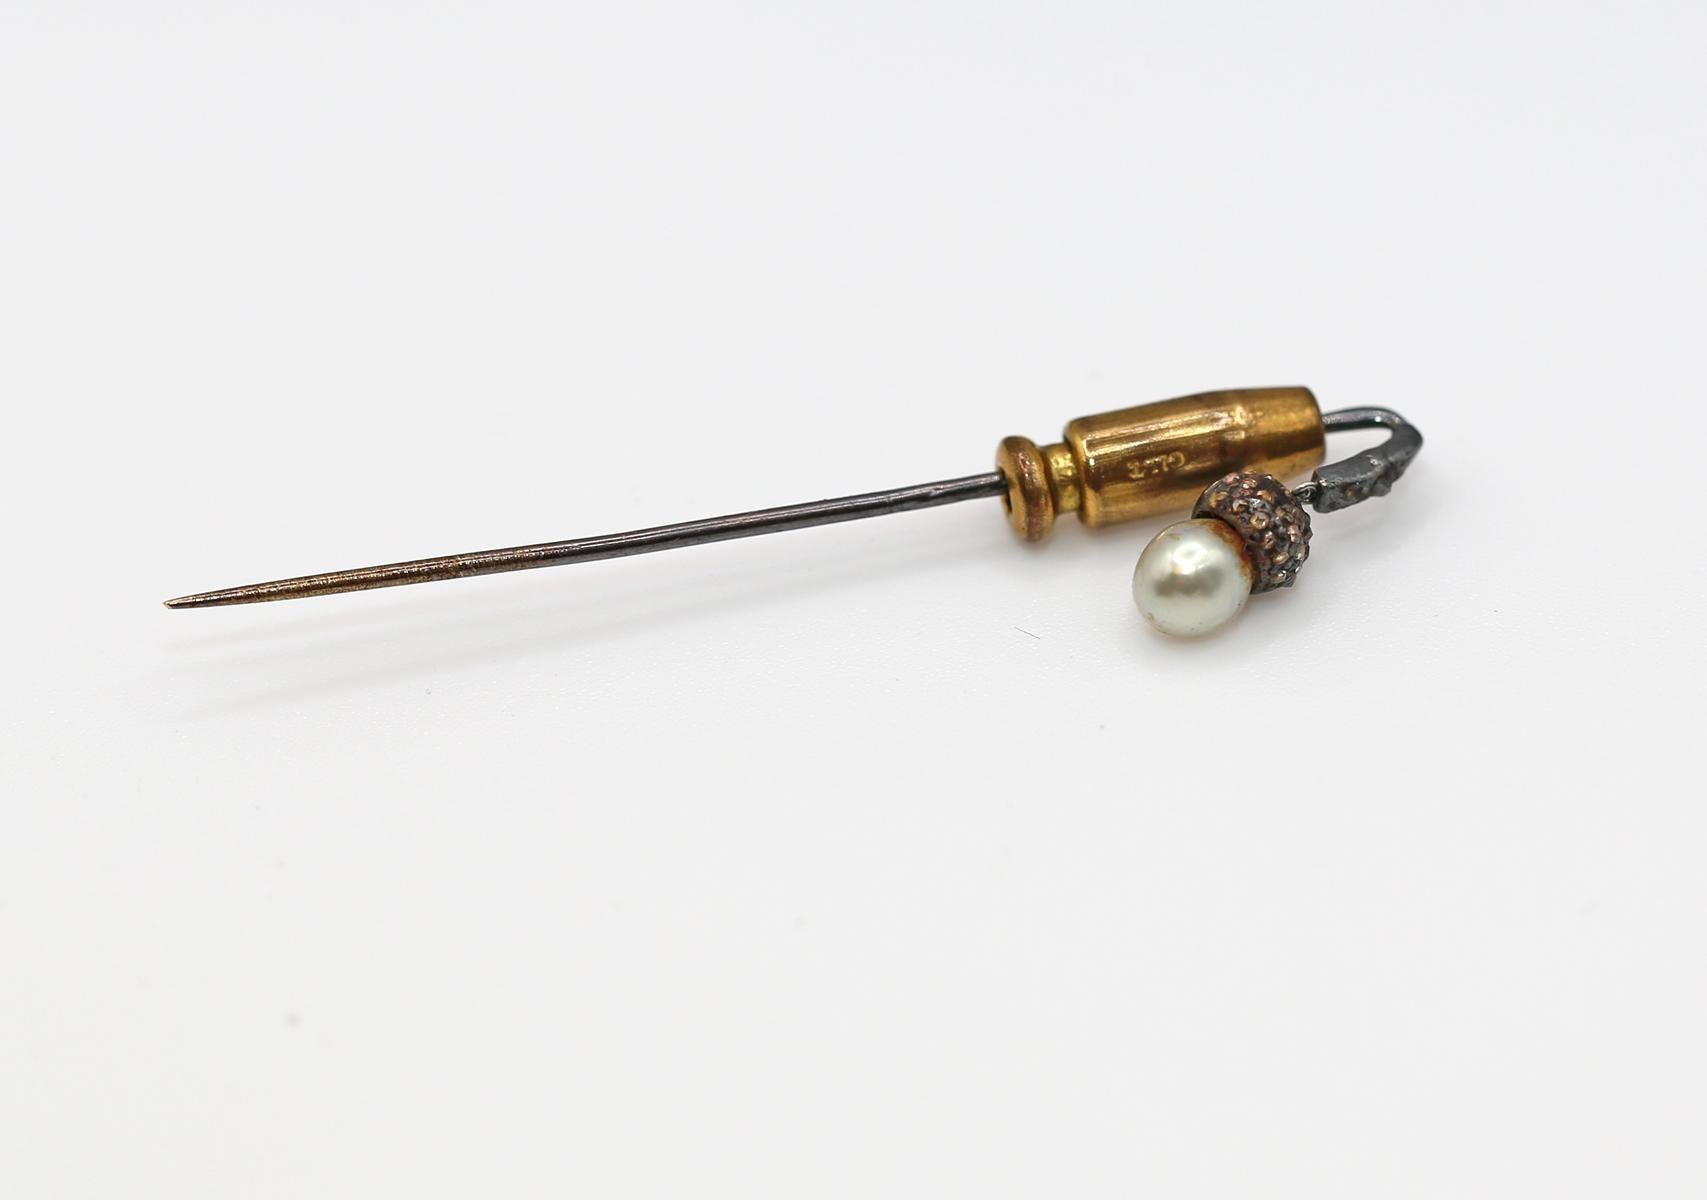 Fine Antique Pin Brooch with a Natural Pearl. Created around 1900. Back in the day such pin/brooches were used to transmit a message, a way of telling a mode perhaps. The art of wearing such pins is almost gone, but that does not mean we can not